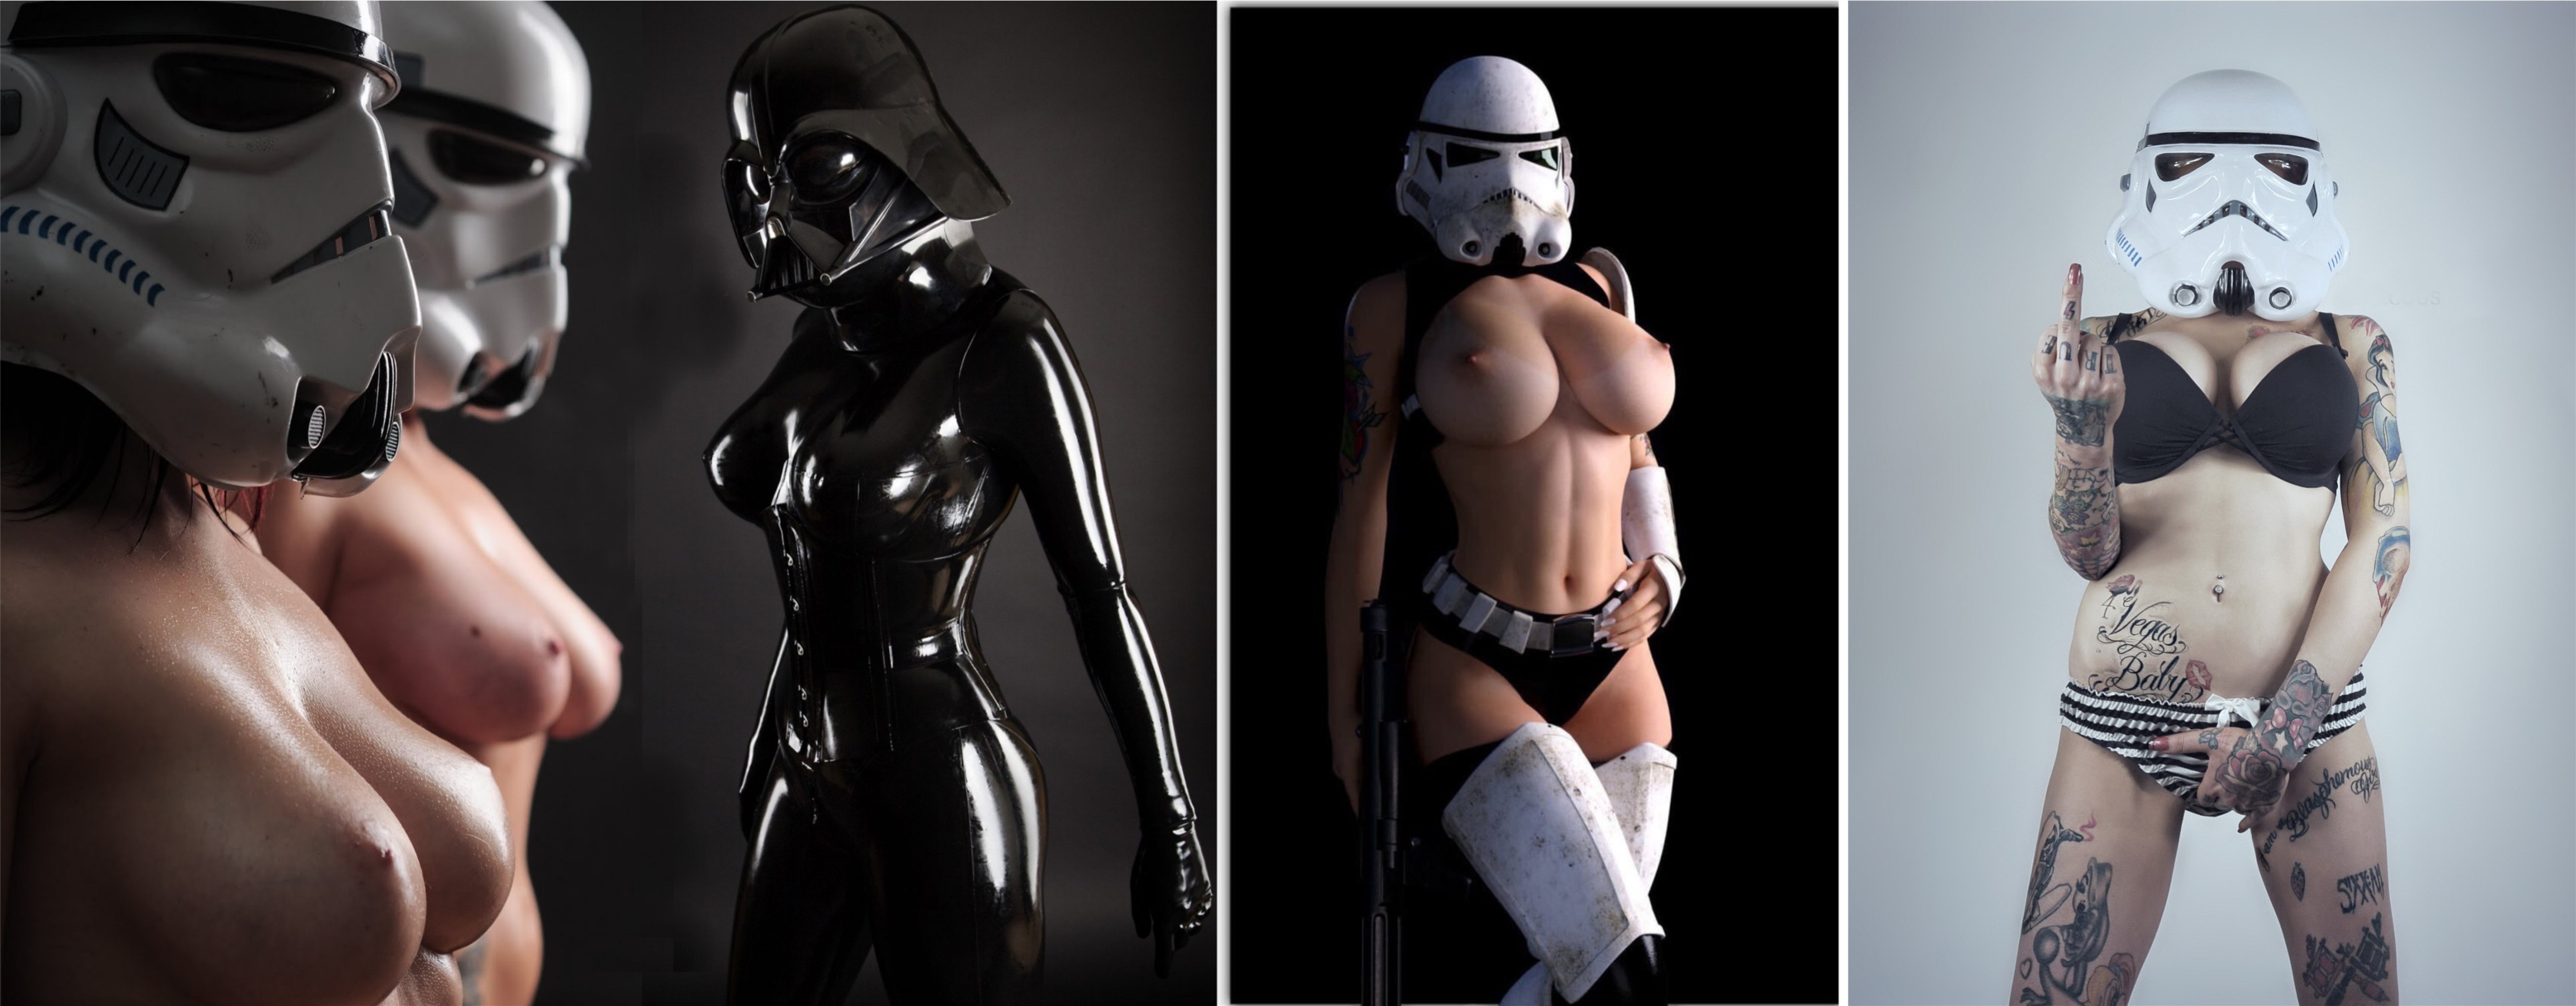 Women star wars stormtrooper sexy naked porn gif